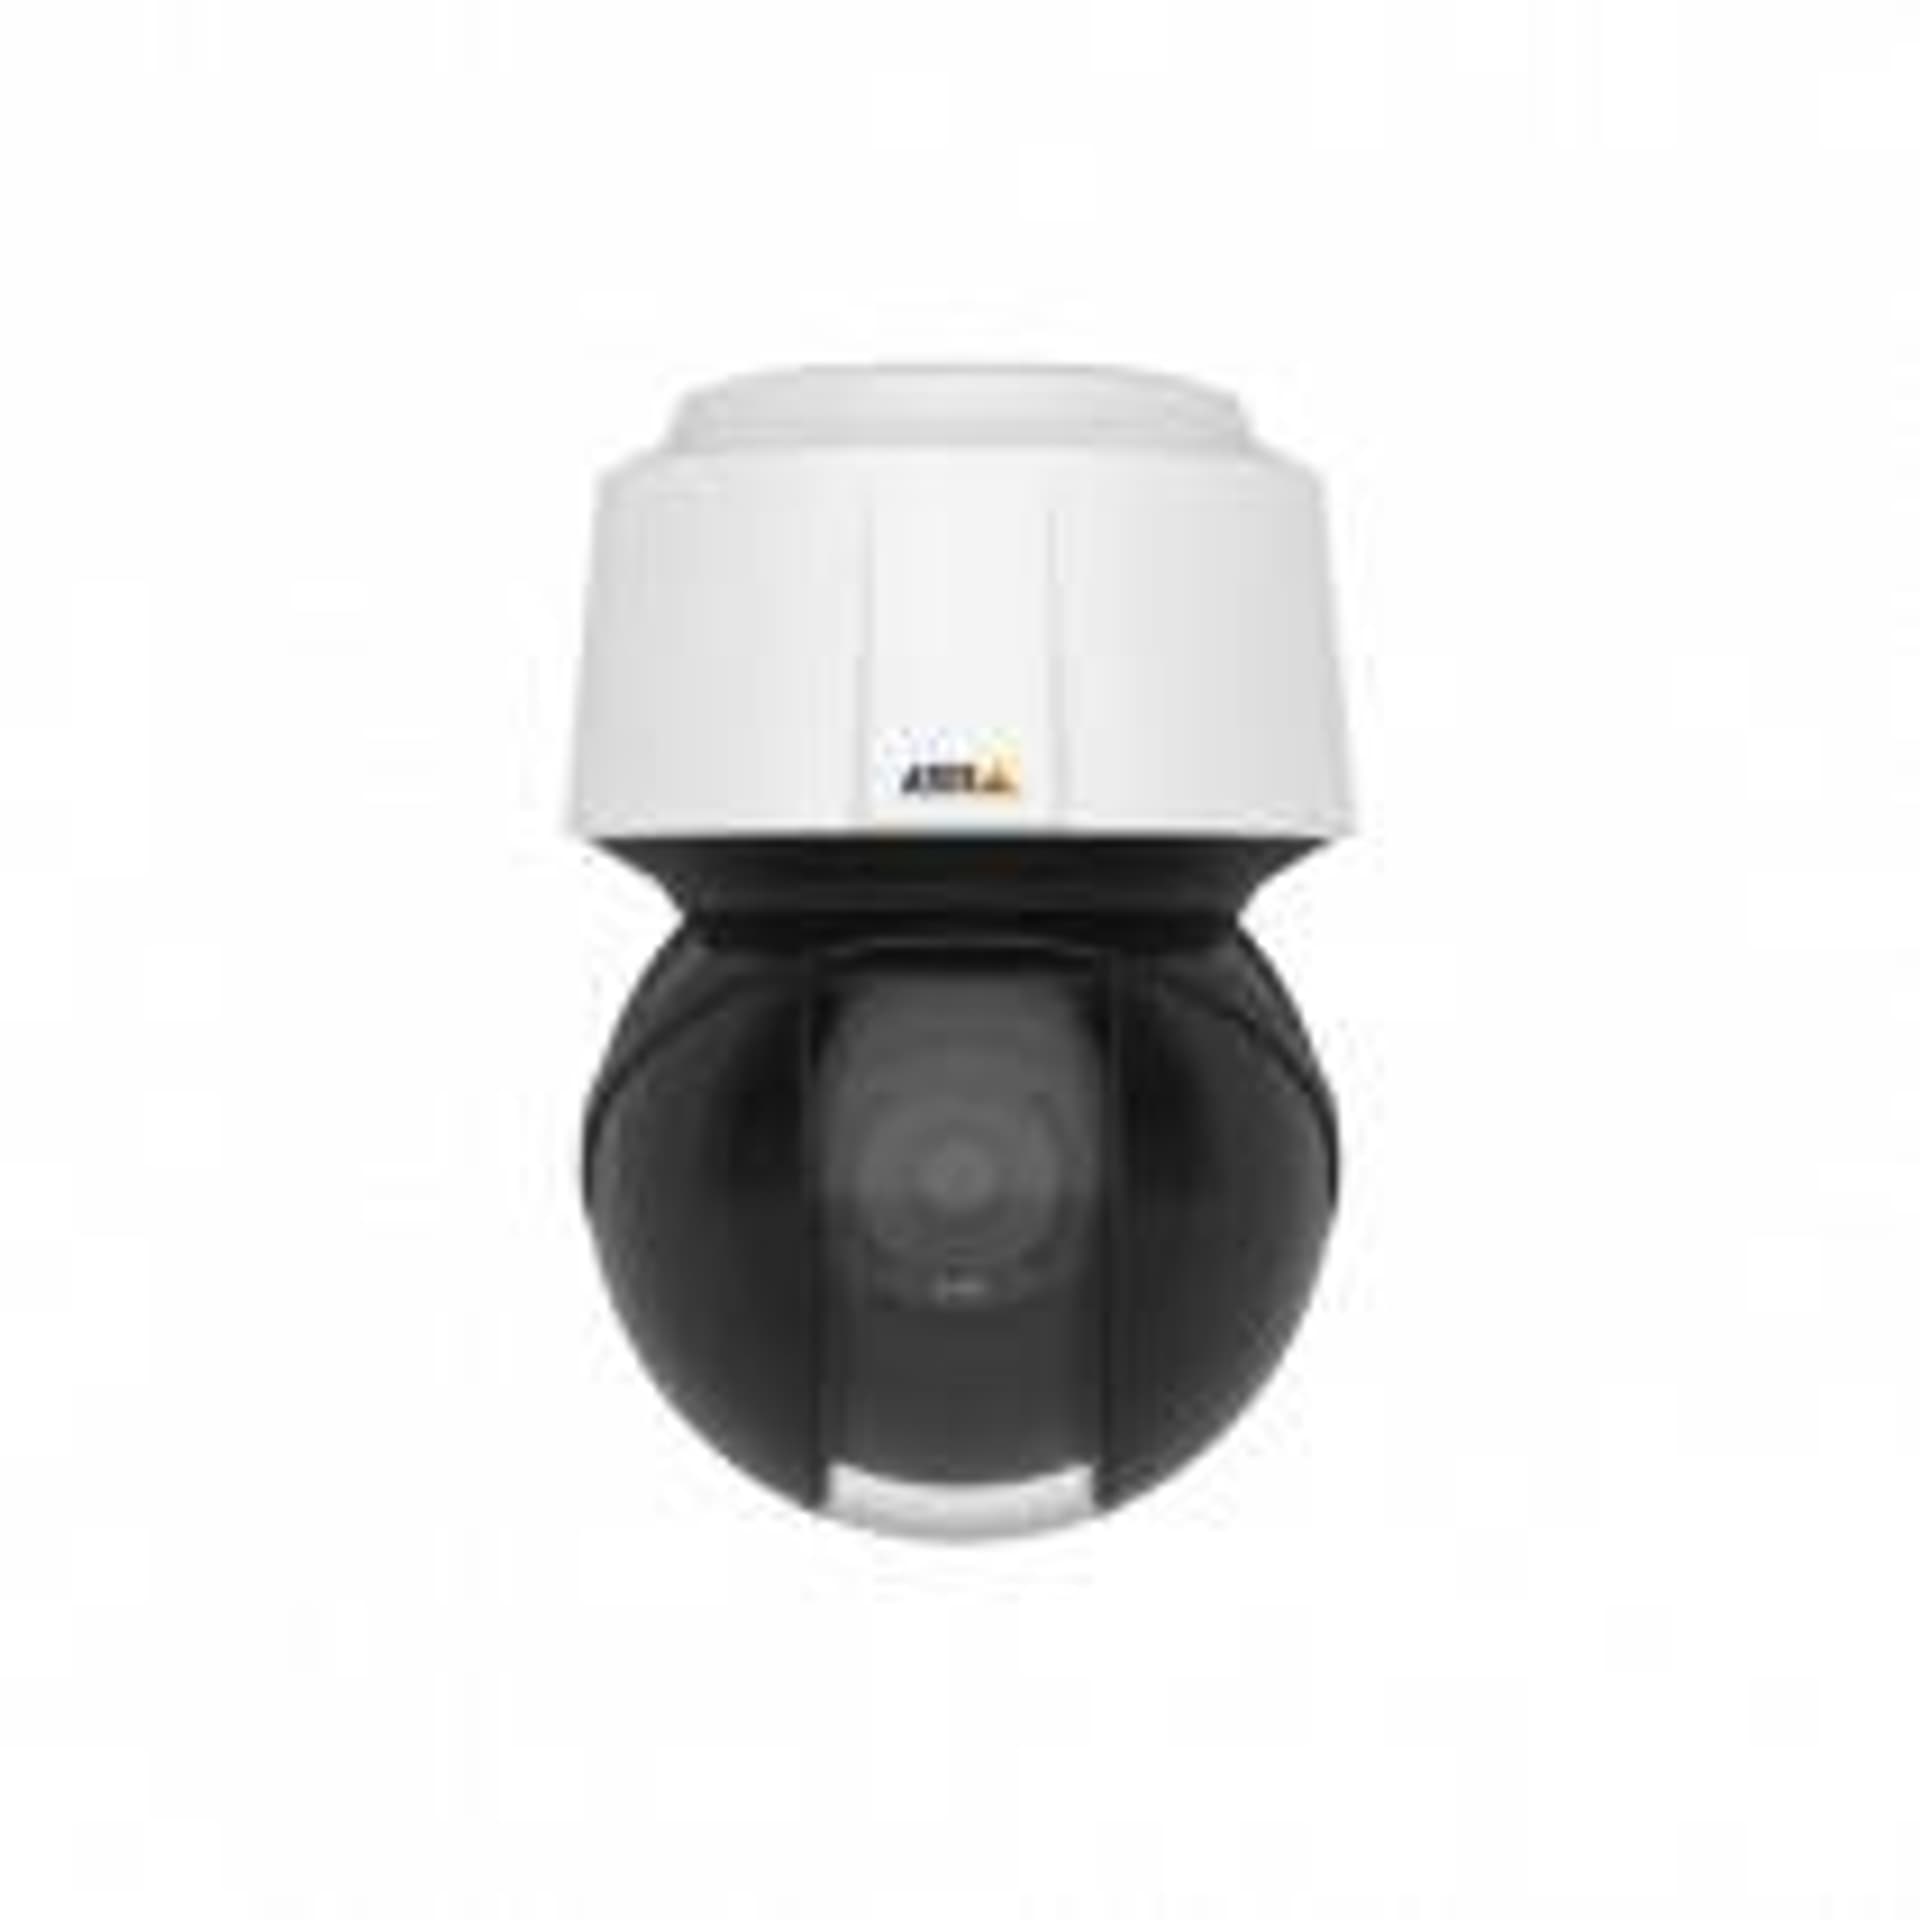 Axis Q6135-LE 50HZ PTZ camera with